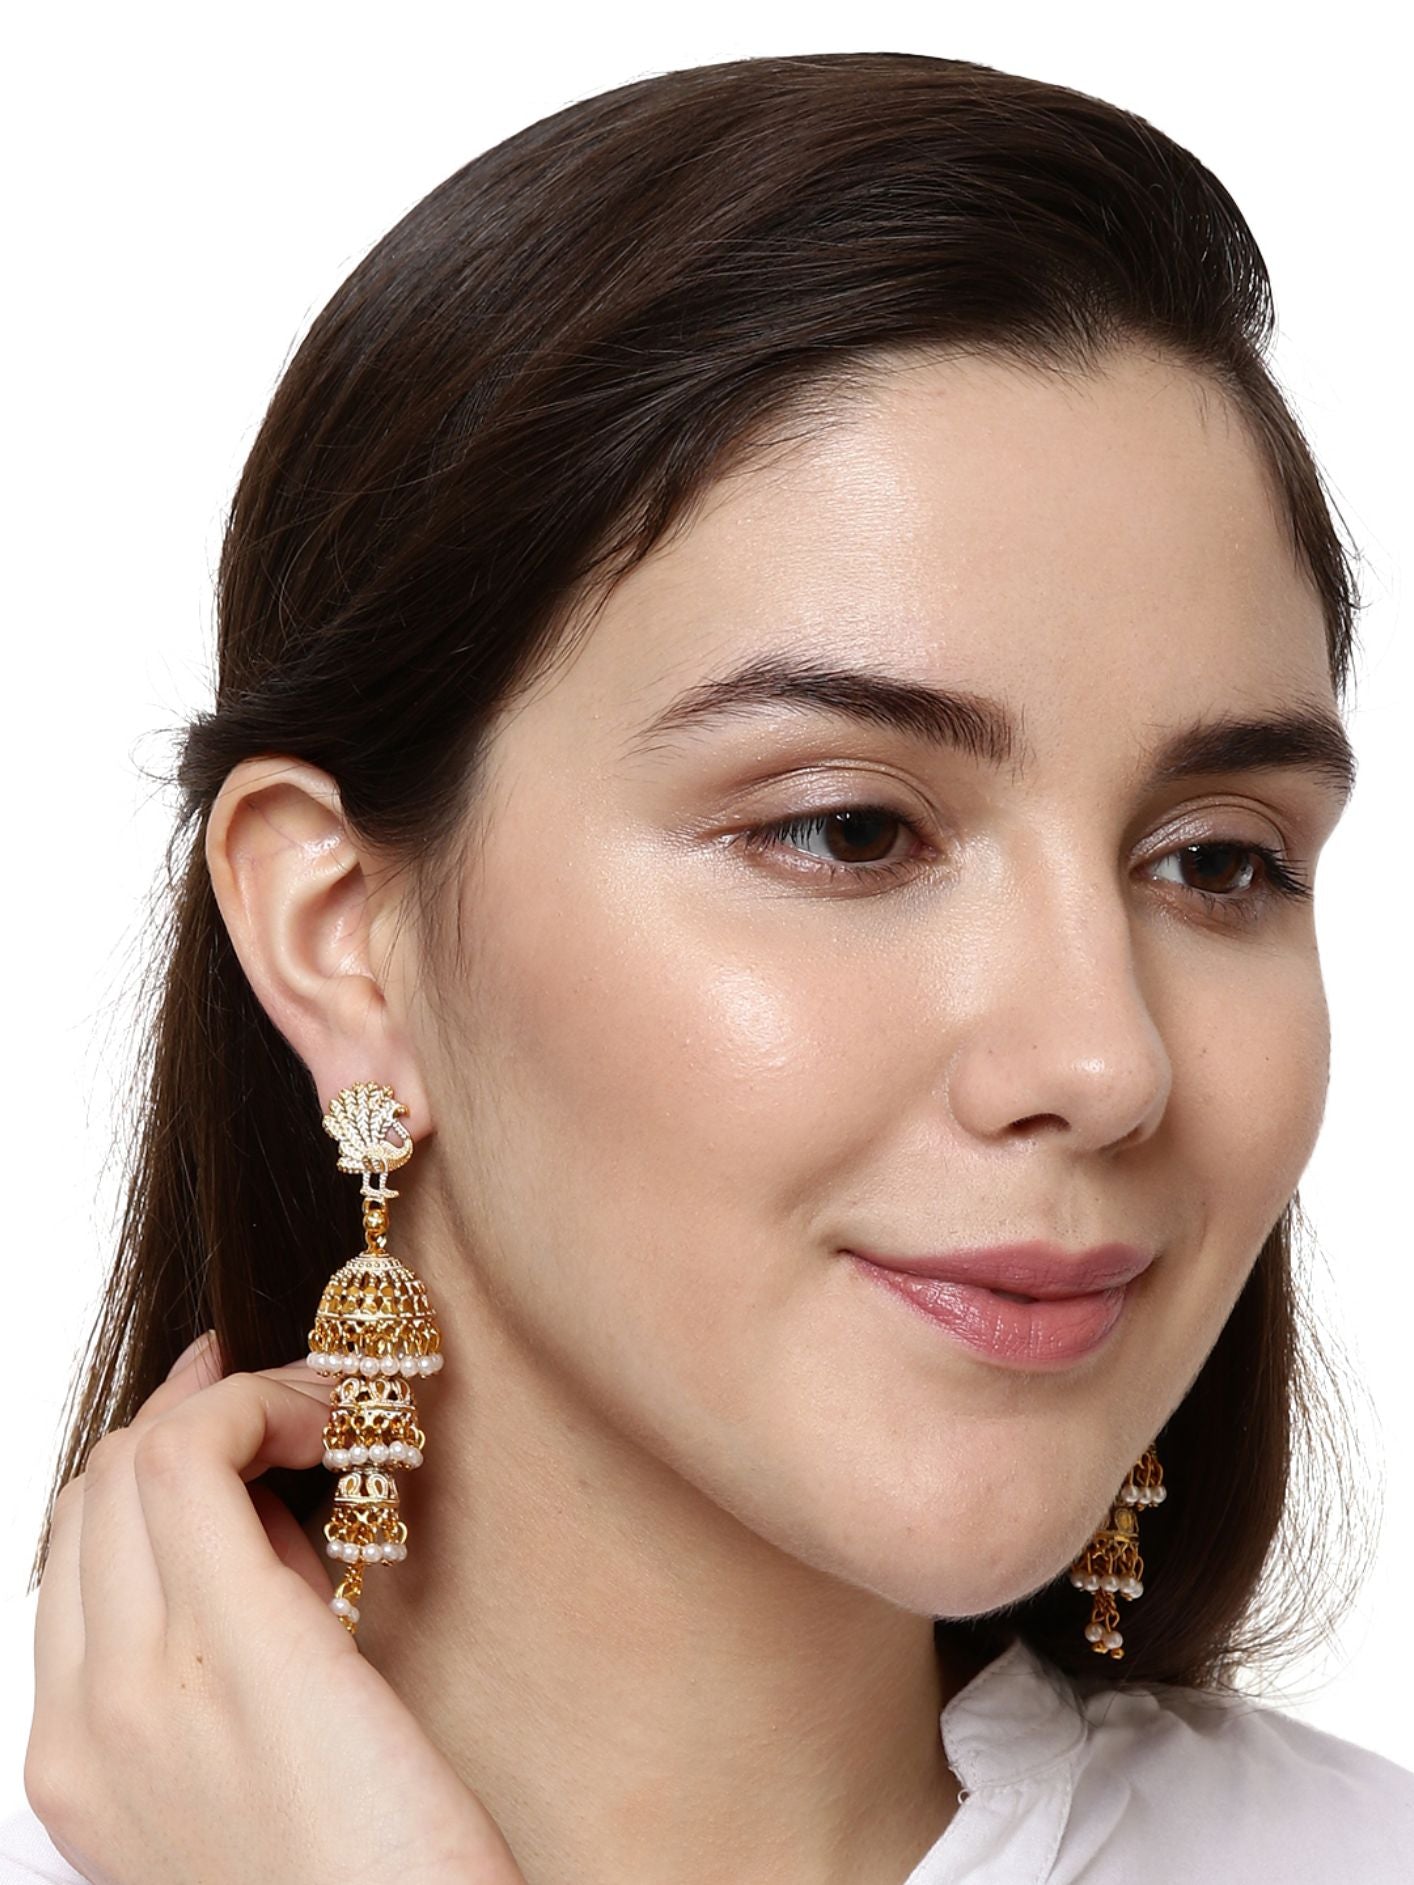 Women's Gold Plated & White Enamelled Peacock Shaped Jhumkas - Anikas Creation